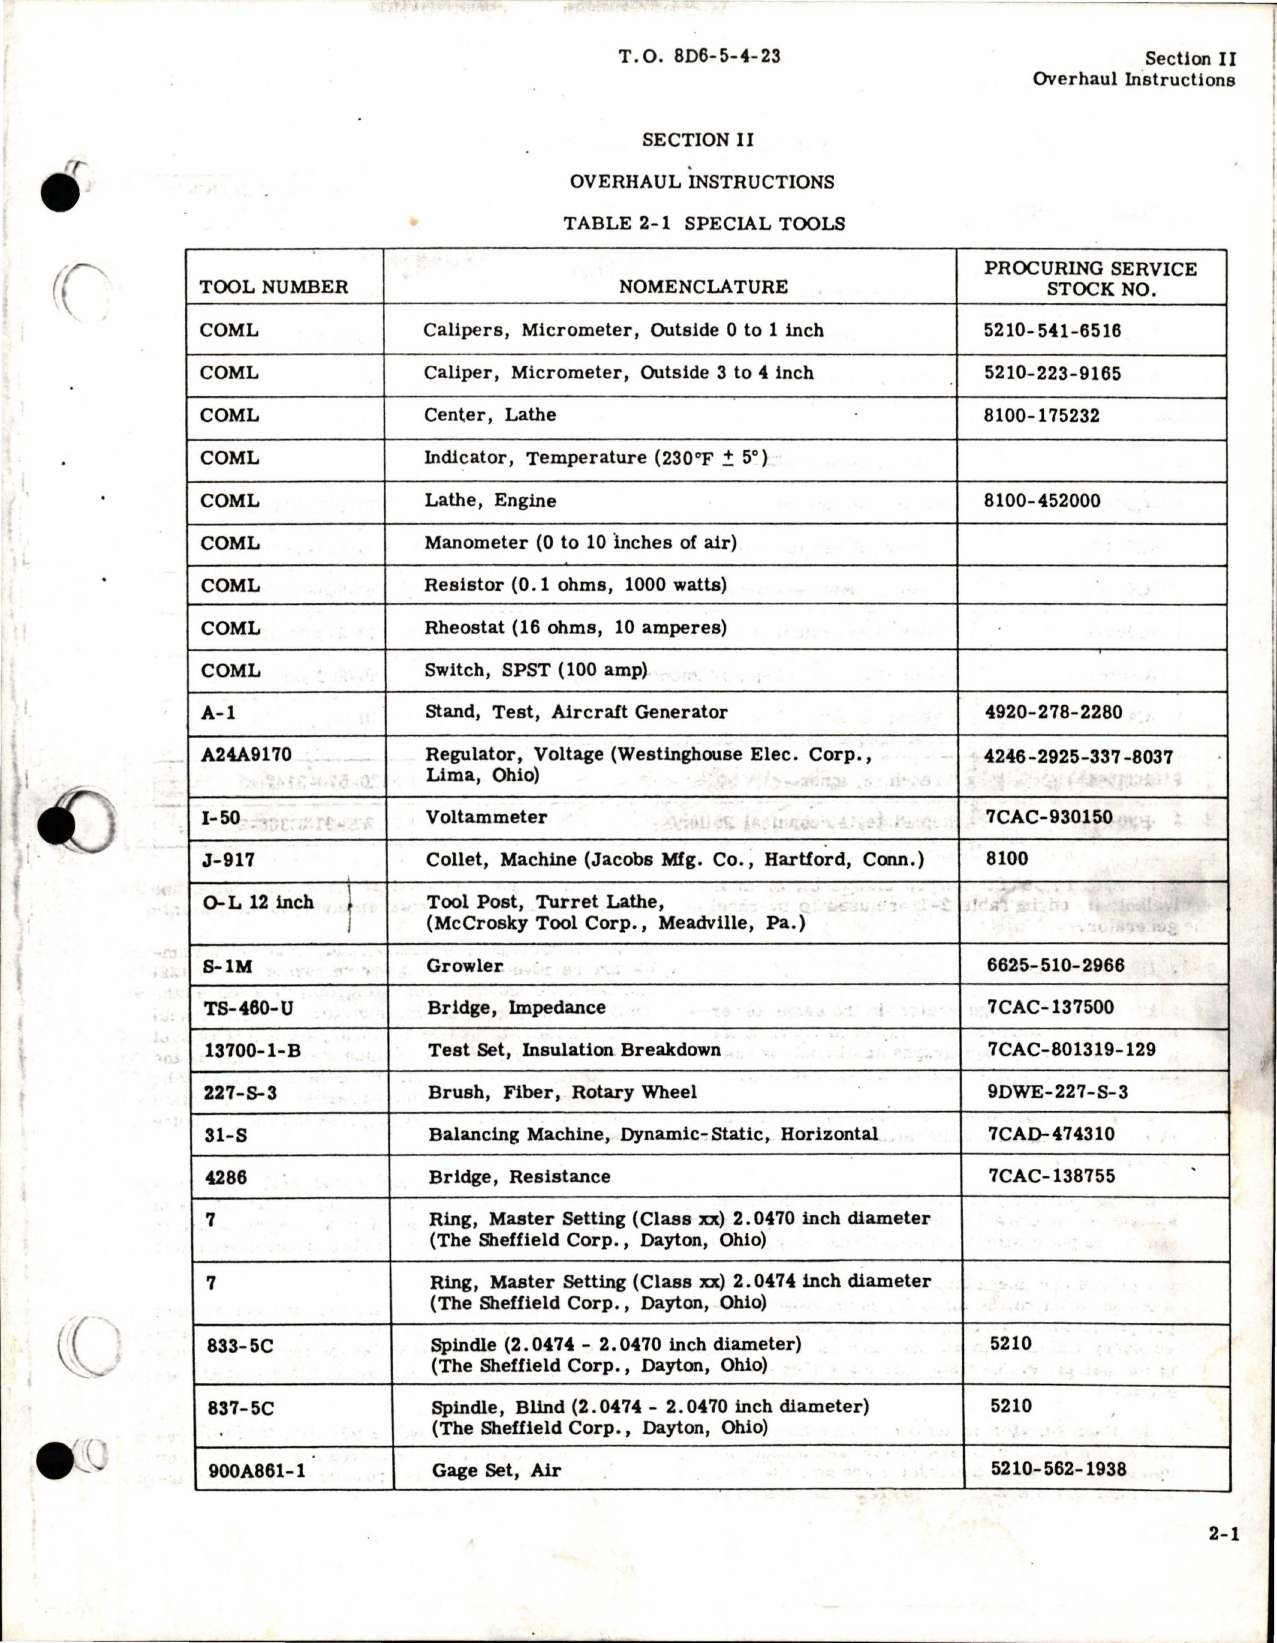 Sample page 7 from AirCorps Library document: Overhaul for DC Generator - Parts A50J251-4, A50J251-1 and 903J789-1